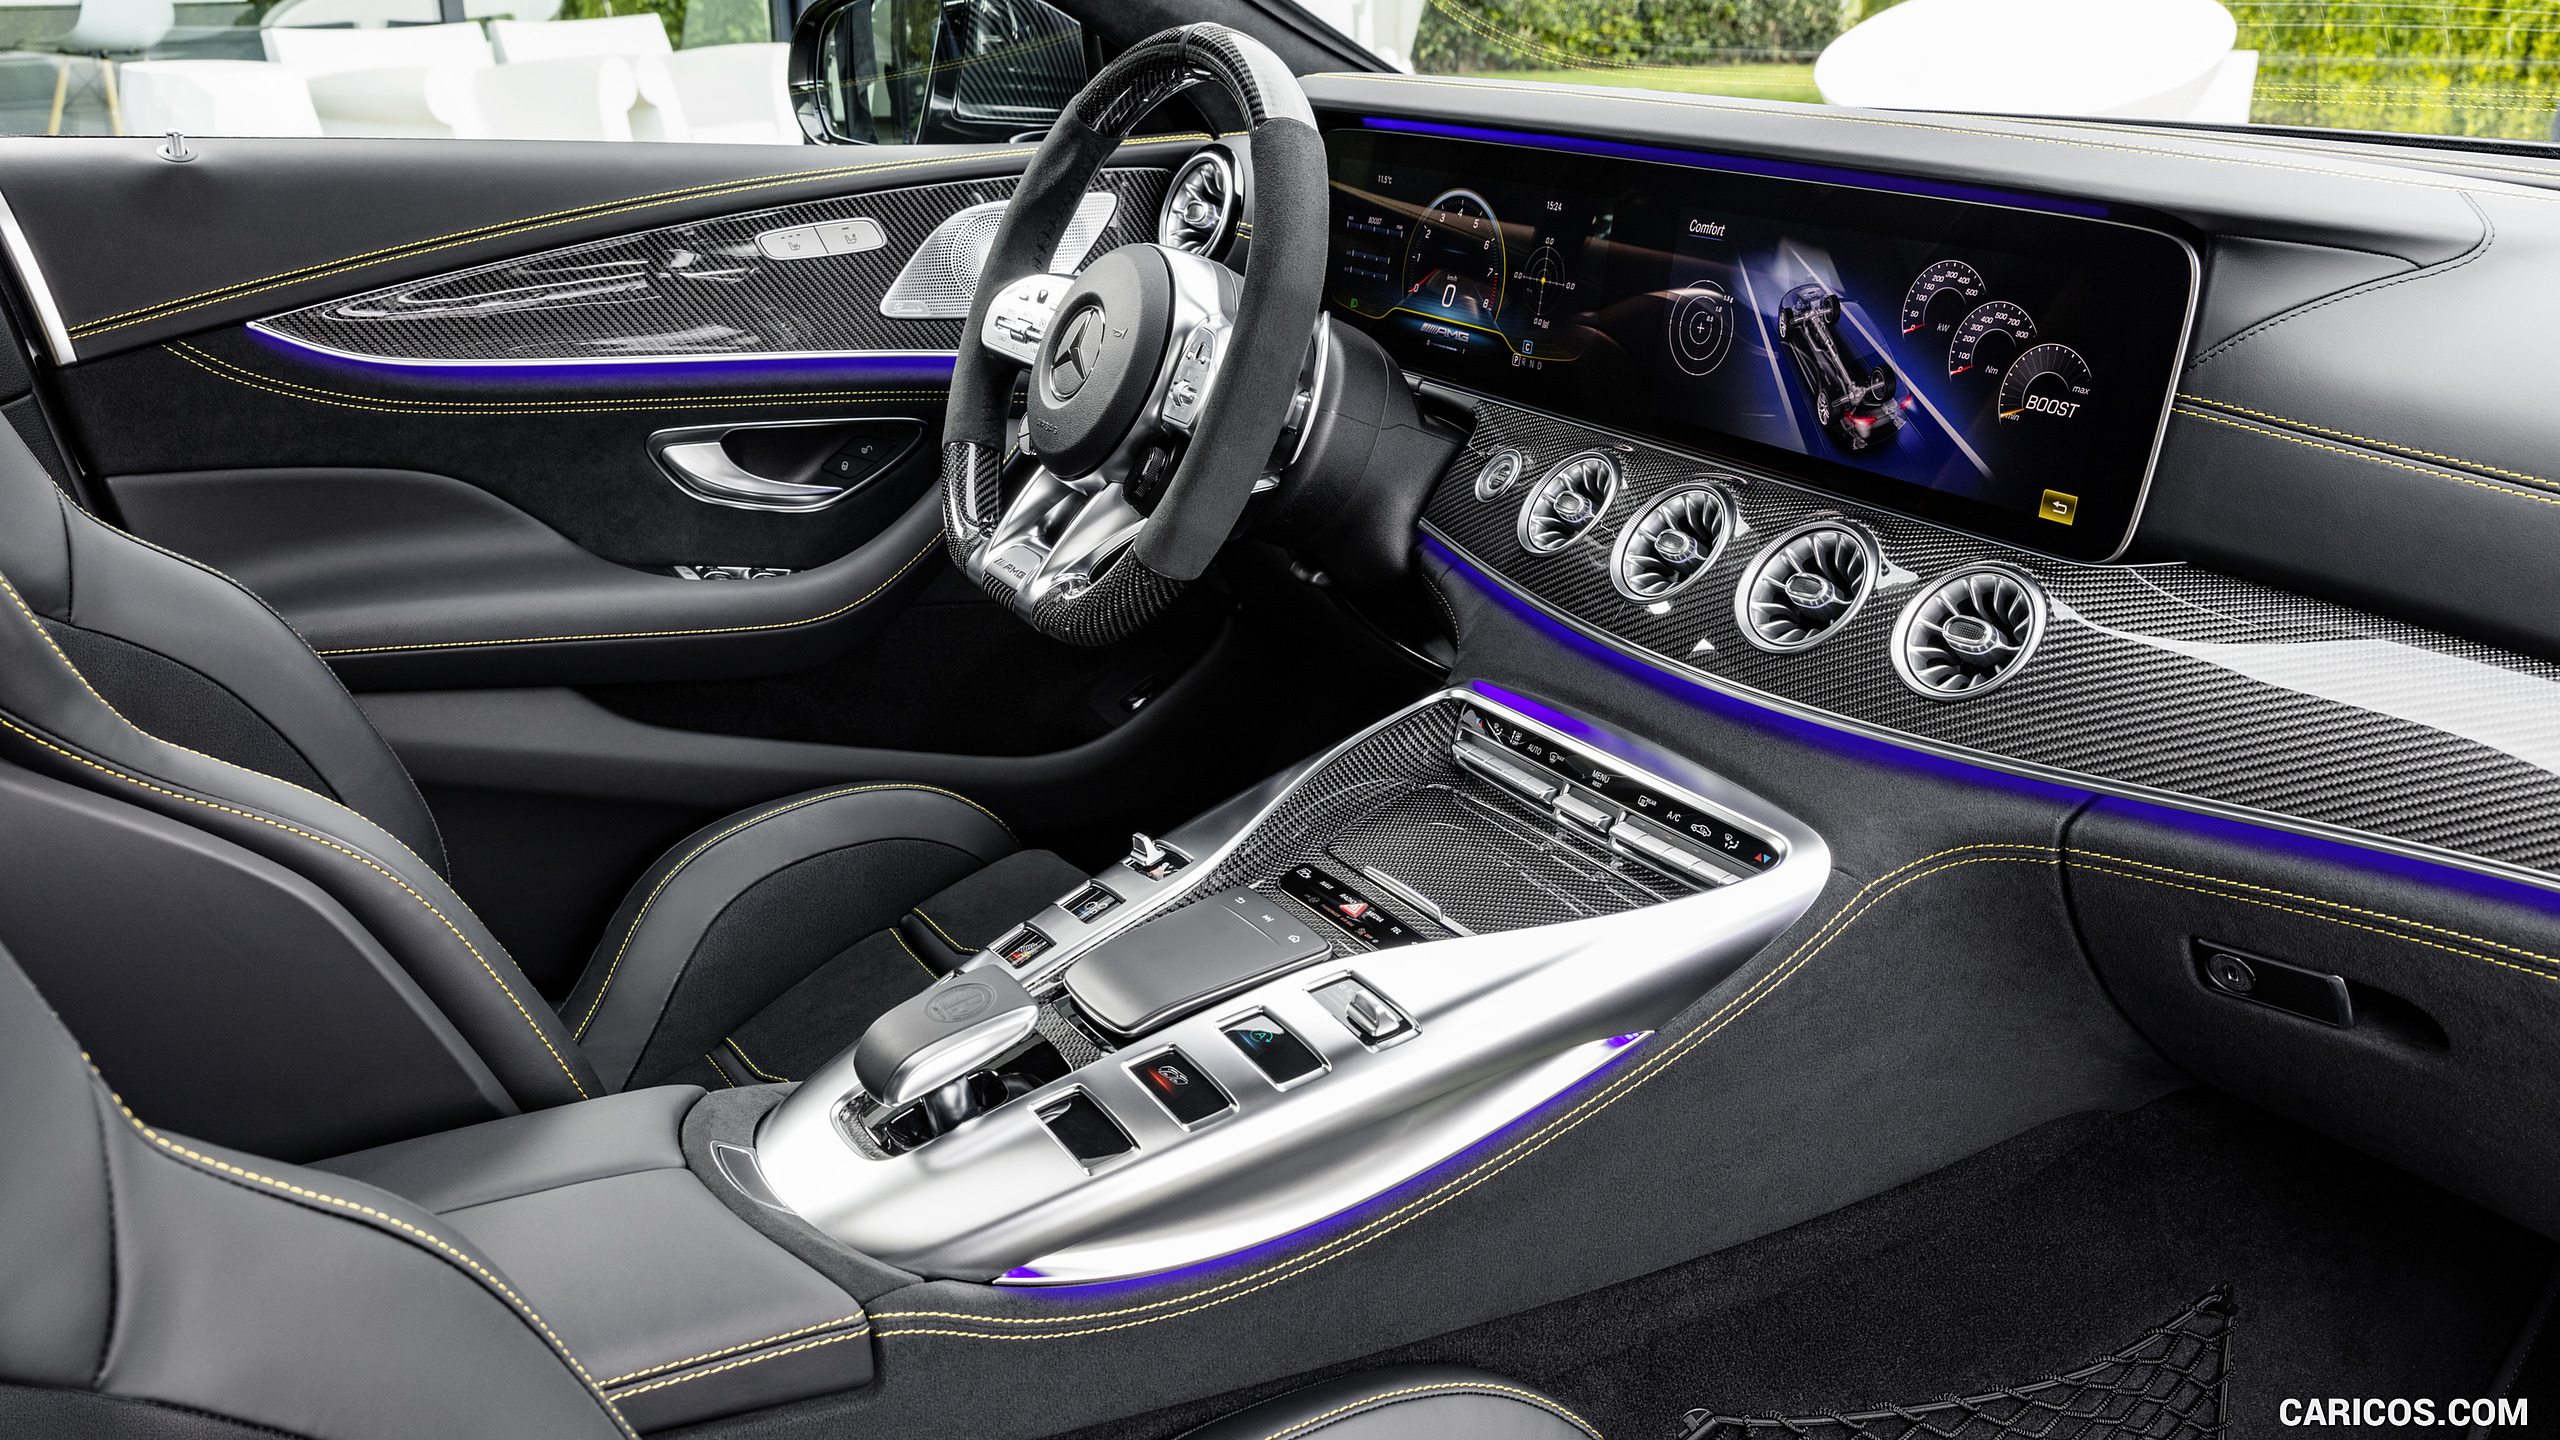 2019 Mercedes-AMG GT 63 S 4MATIC+ 4-Door Coupe - Interior, Detail, #39 of 427